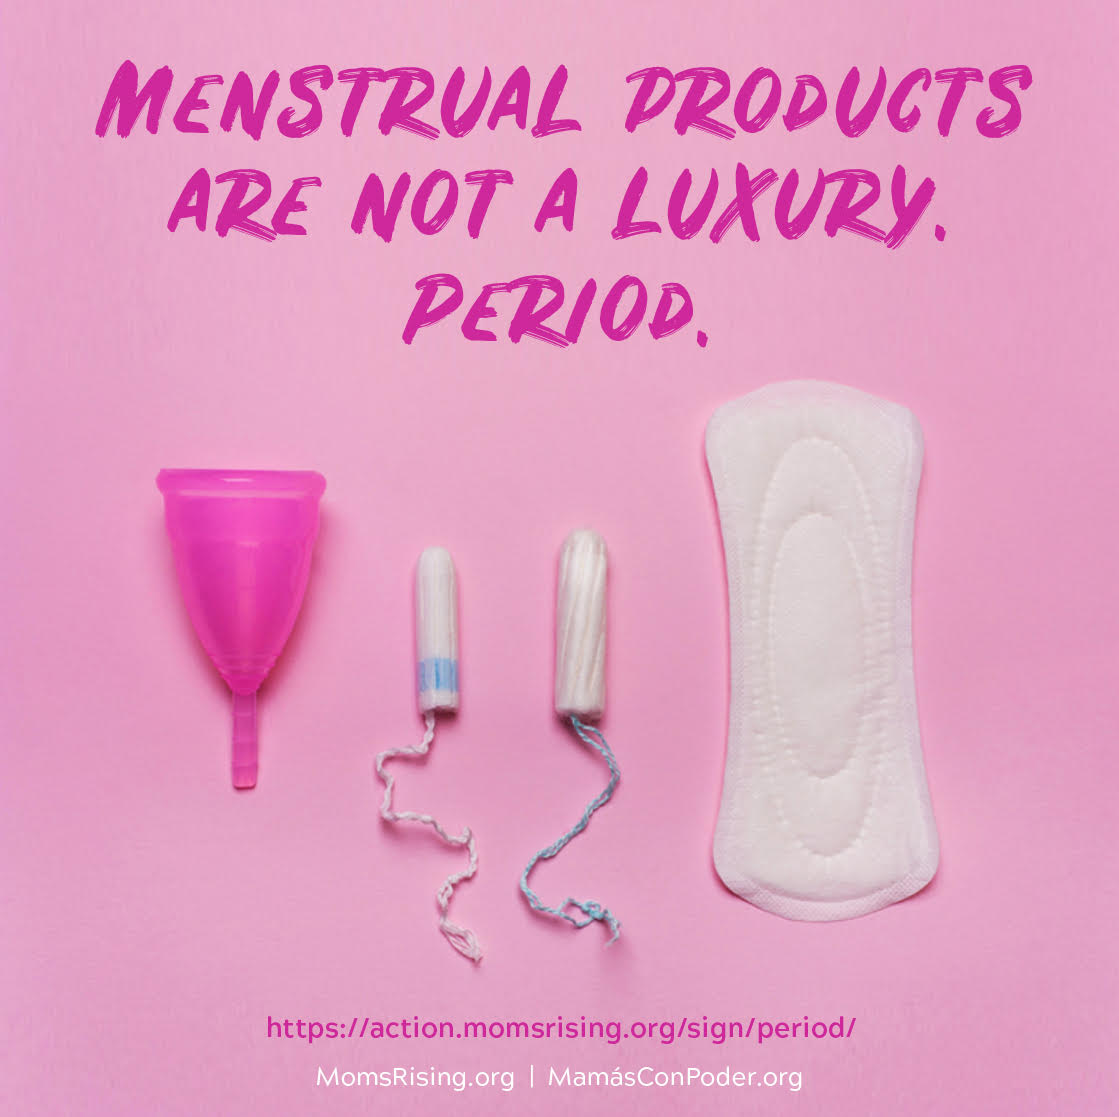 Tell Congress Tampons + Pads + Menstrual cups ≠ luxury